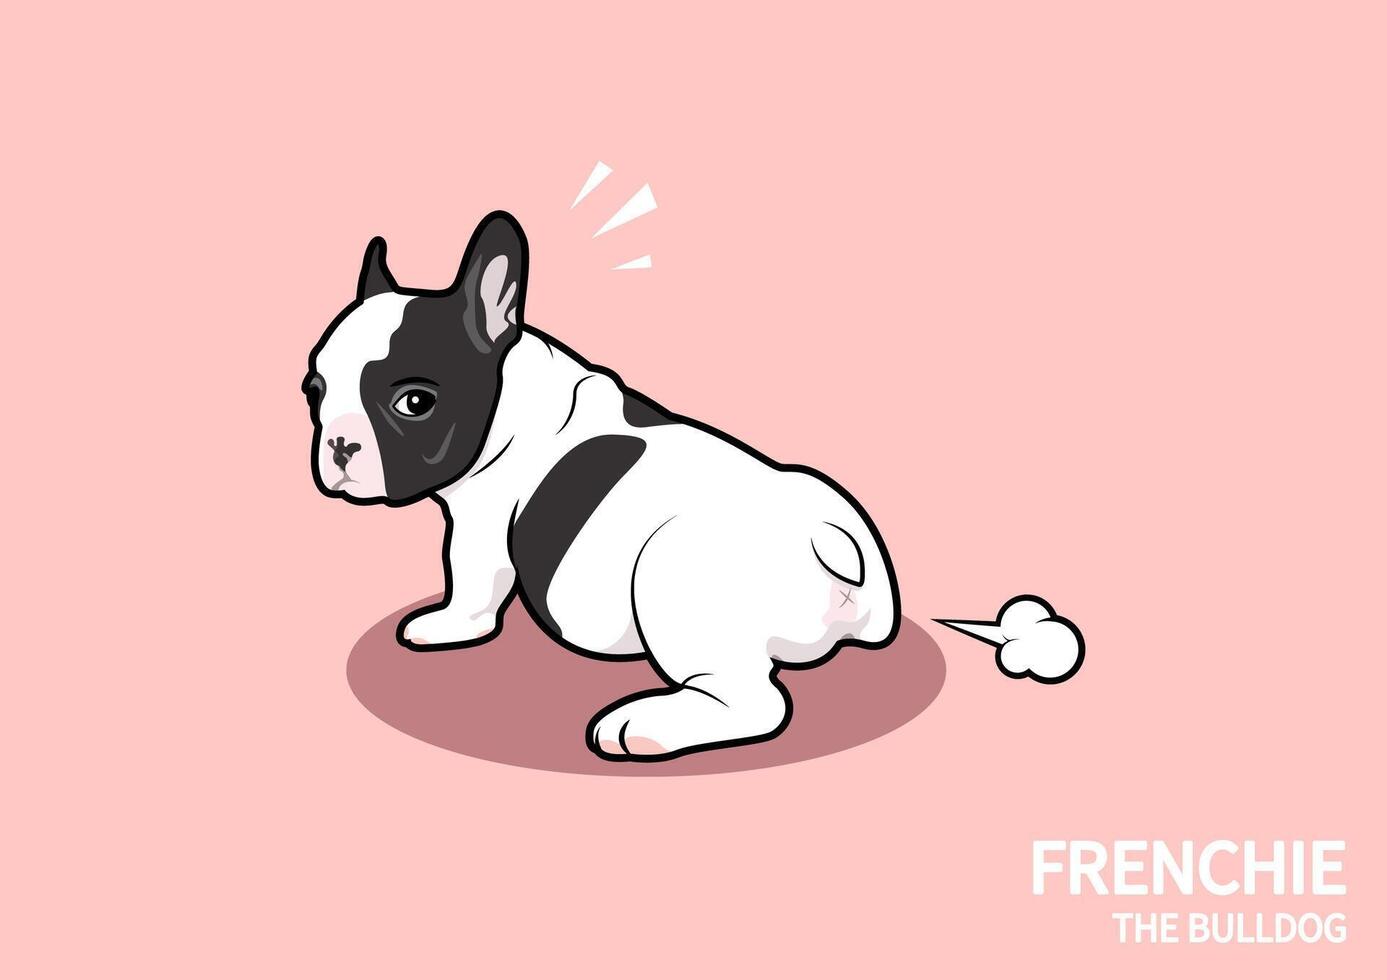 A cute black and white French Bulldog puppy vector